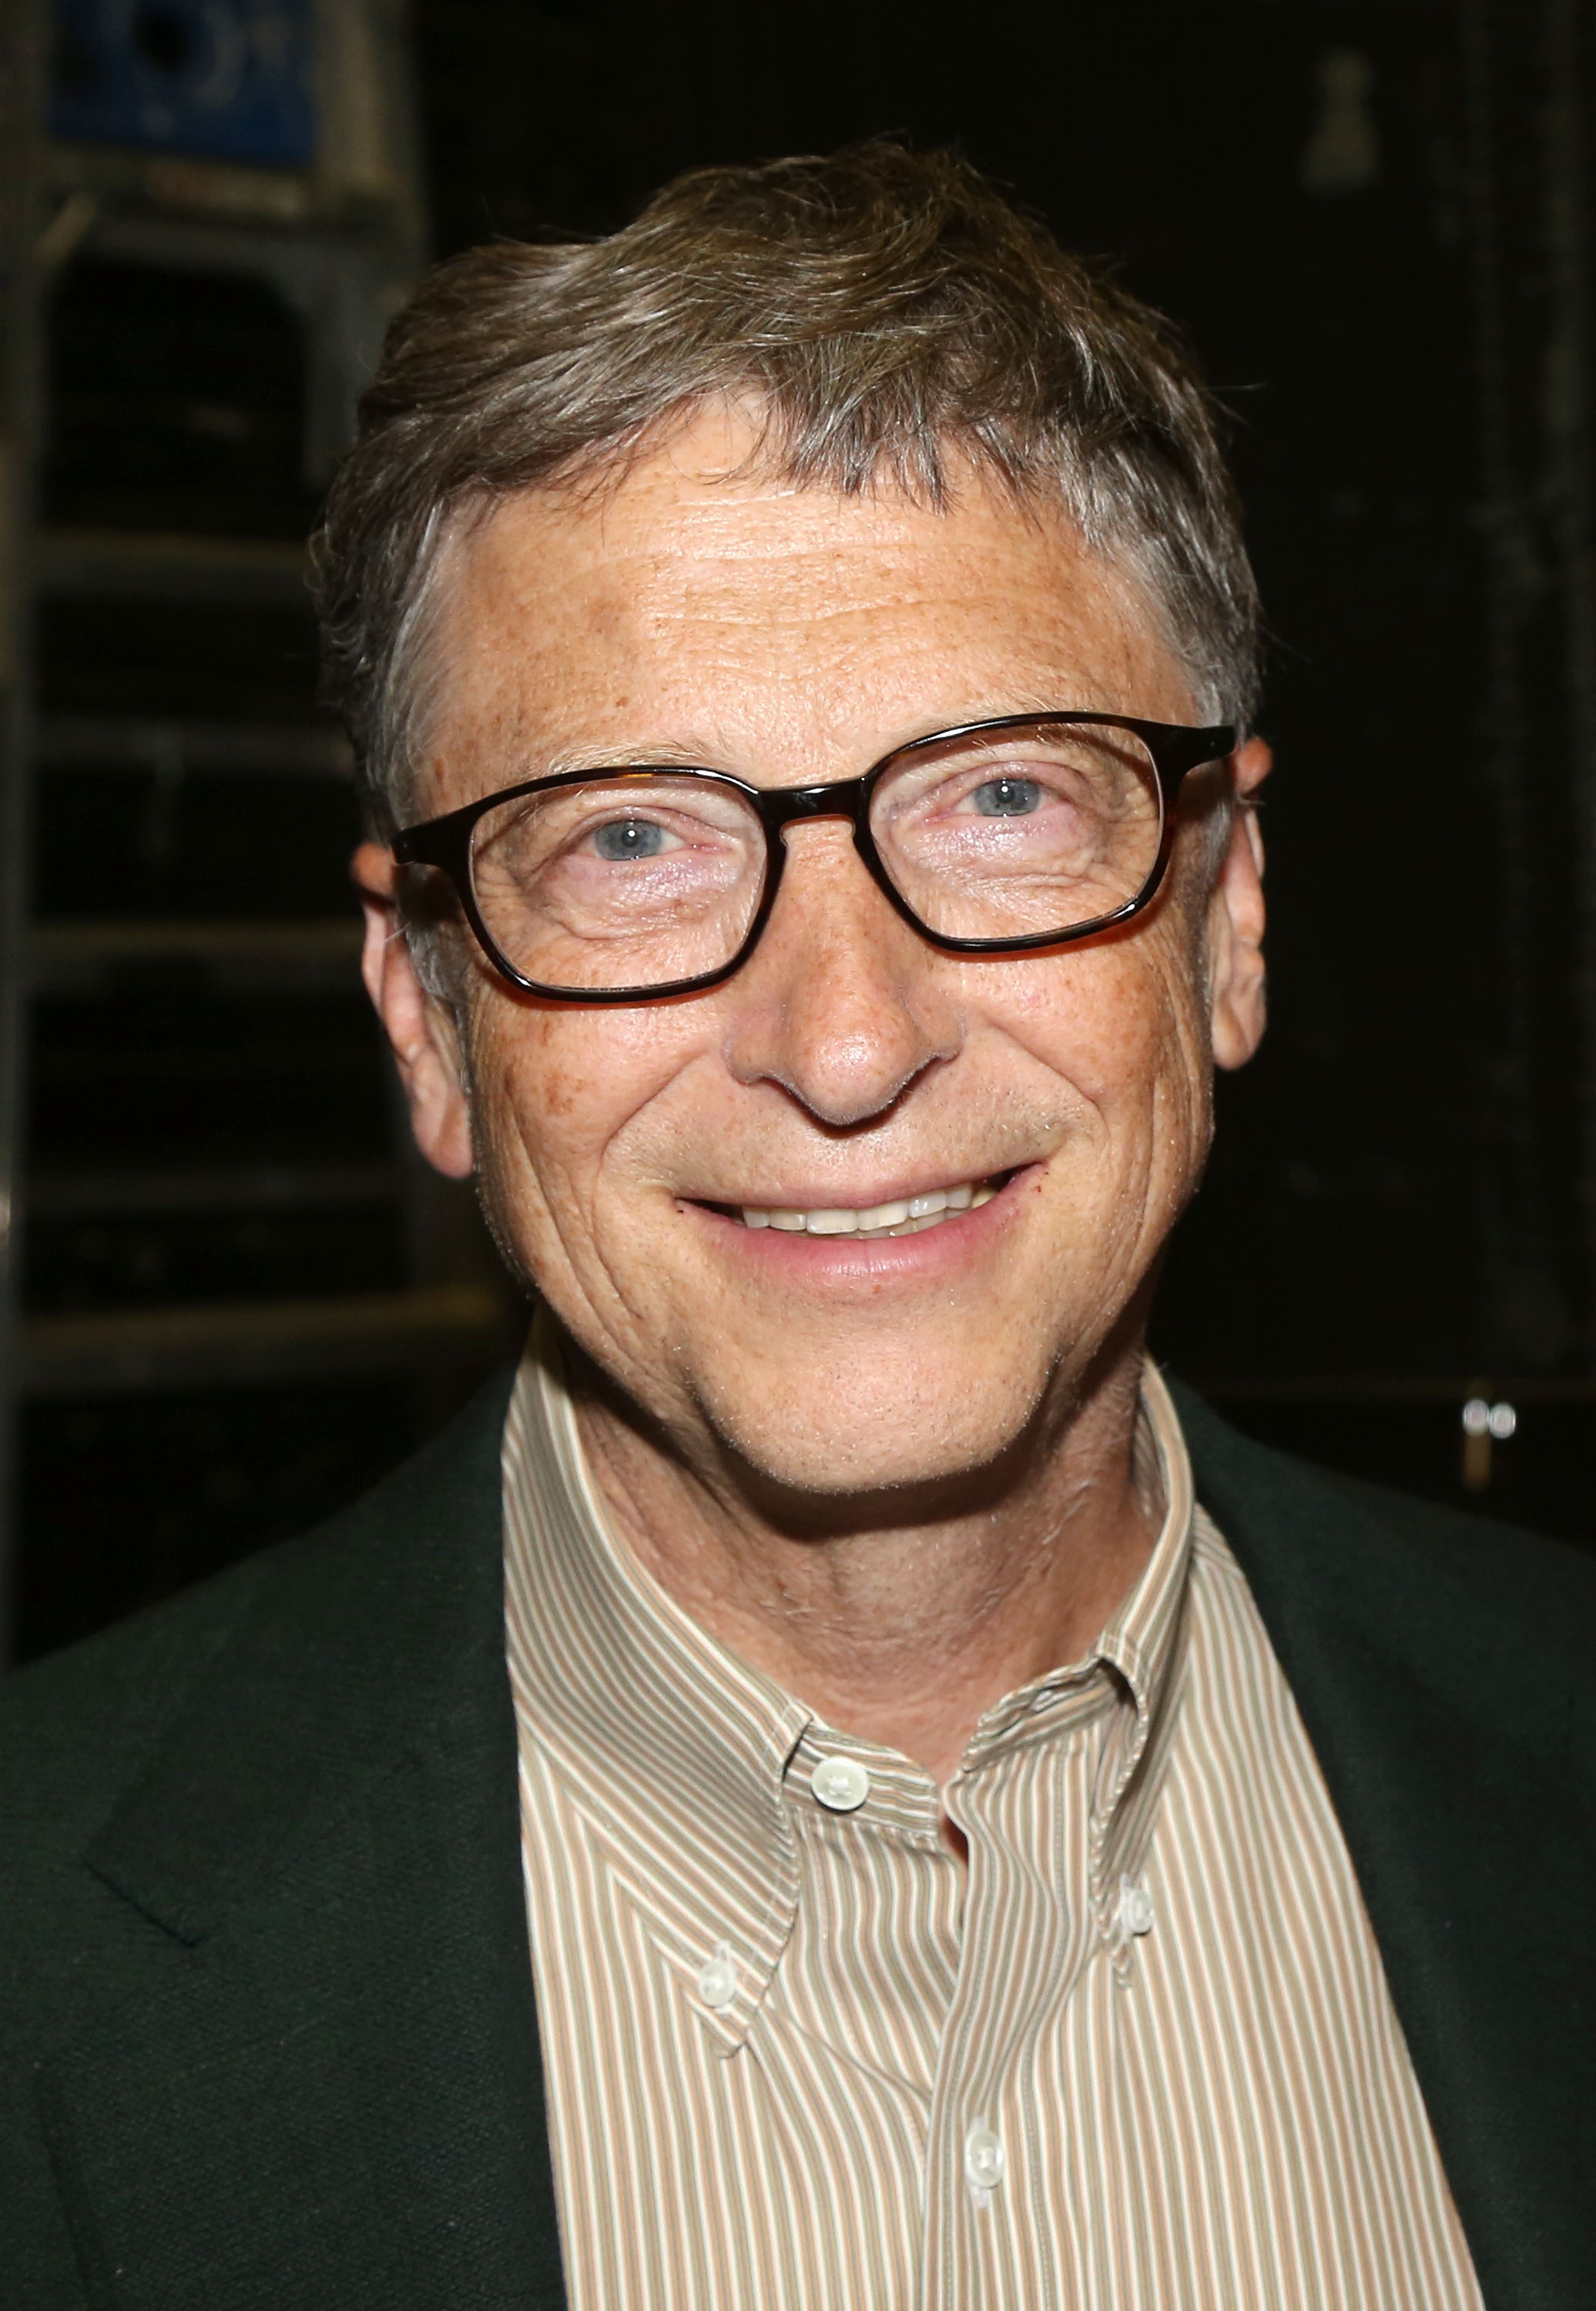 Bill Gates at musical "Hamilton" on Broadway in New York City on Oct. 11, 2015.